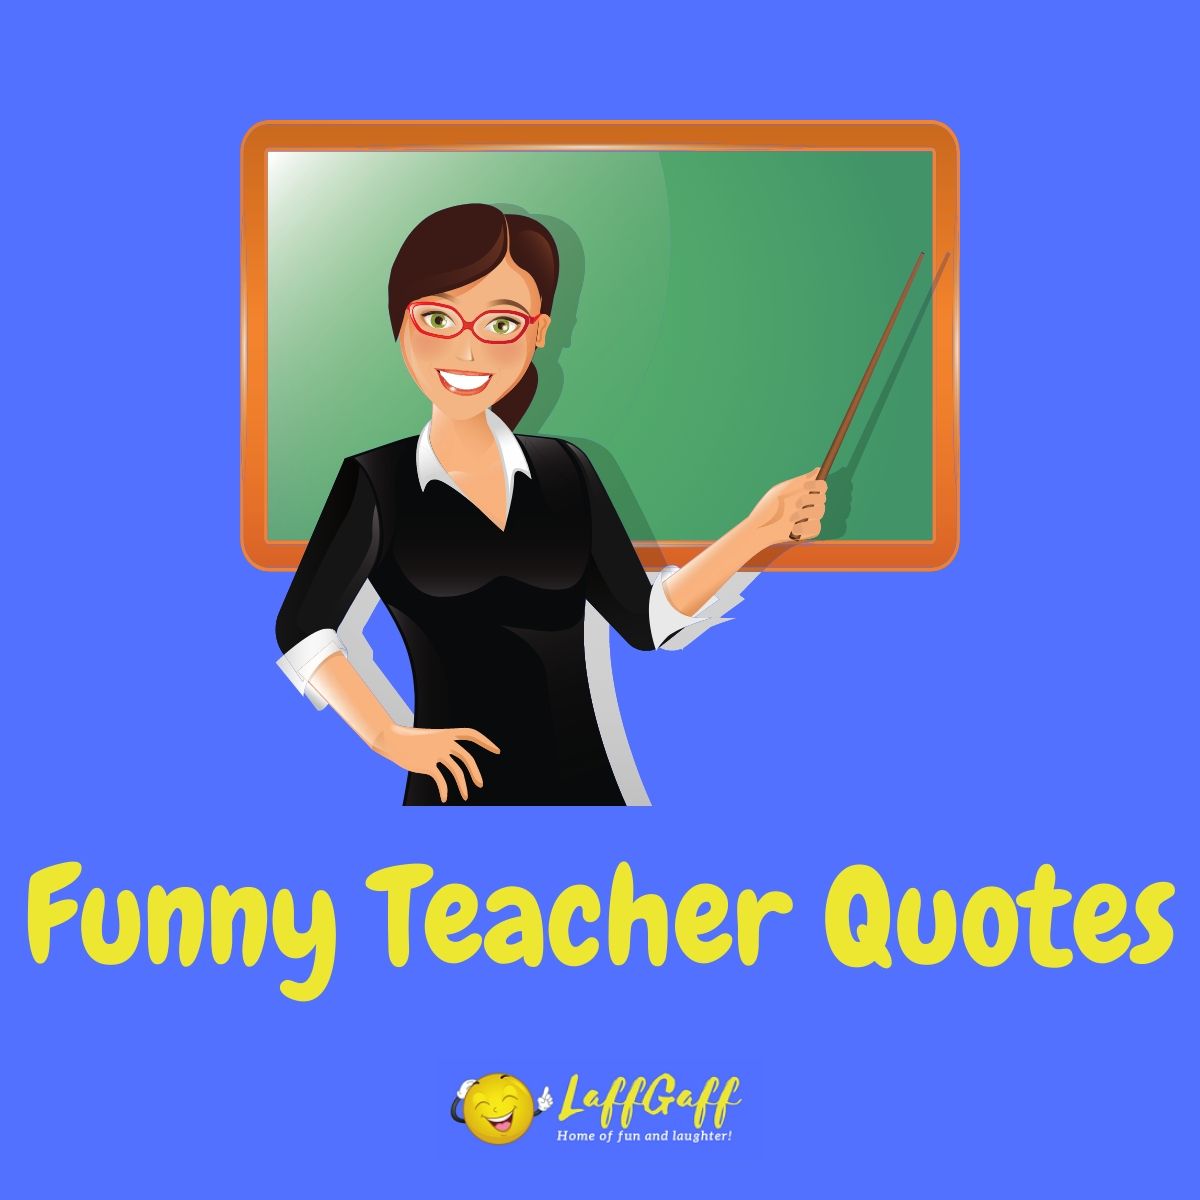 Featured image for a page of funny teacher quotes.